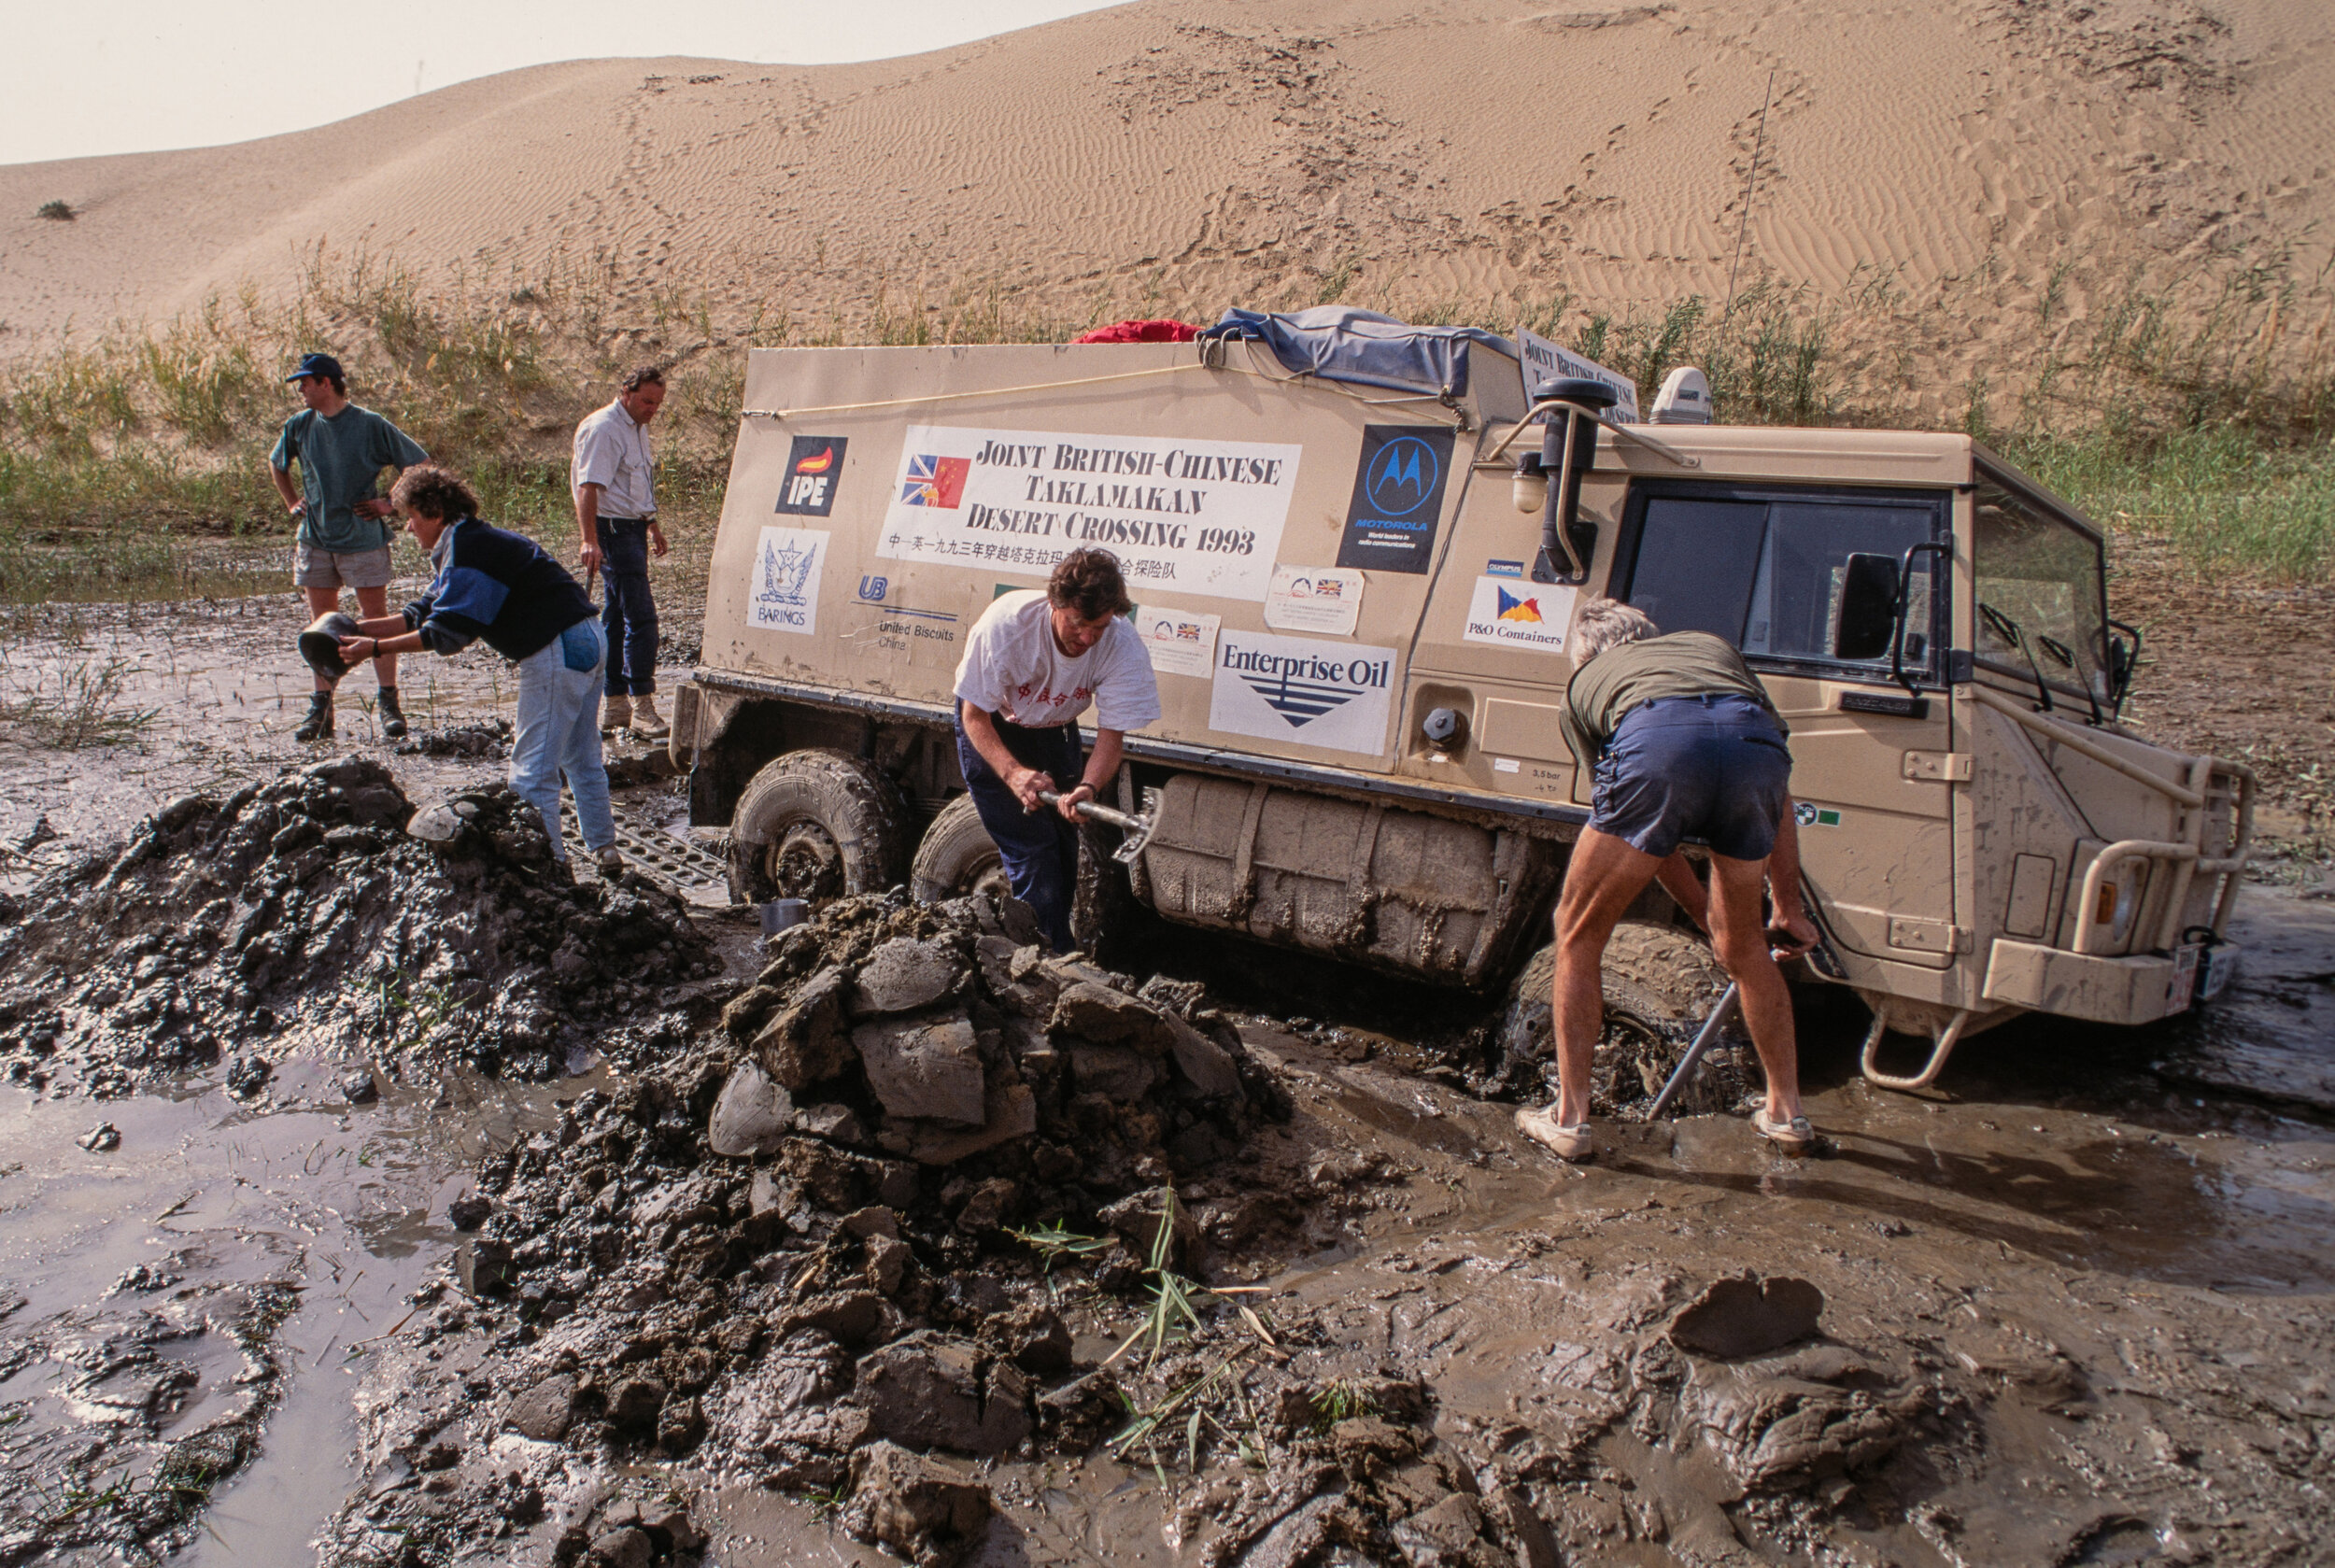  The re-supply team was stuck for nearly 4 days in this incident along the Keriya River. 